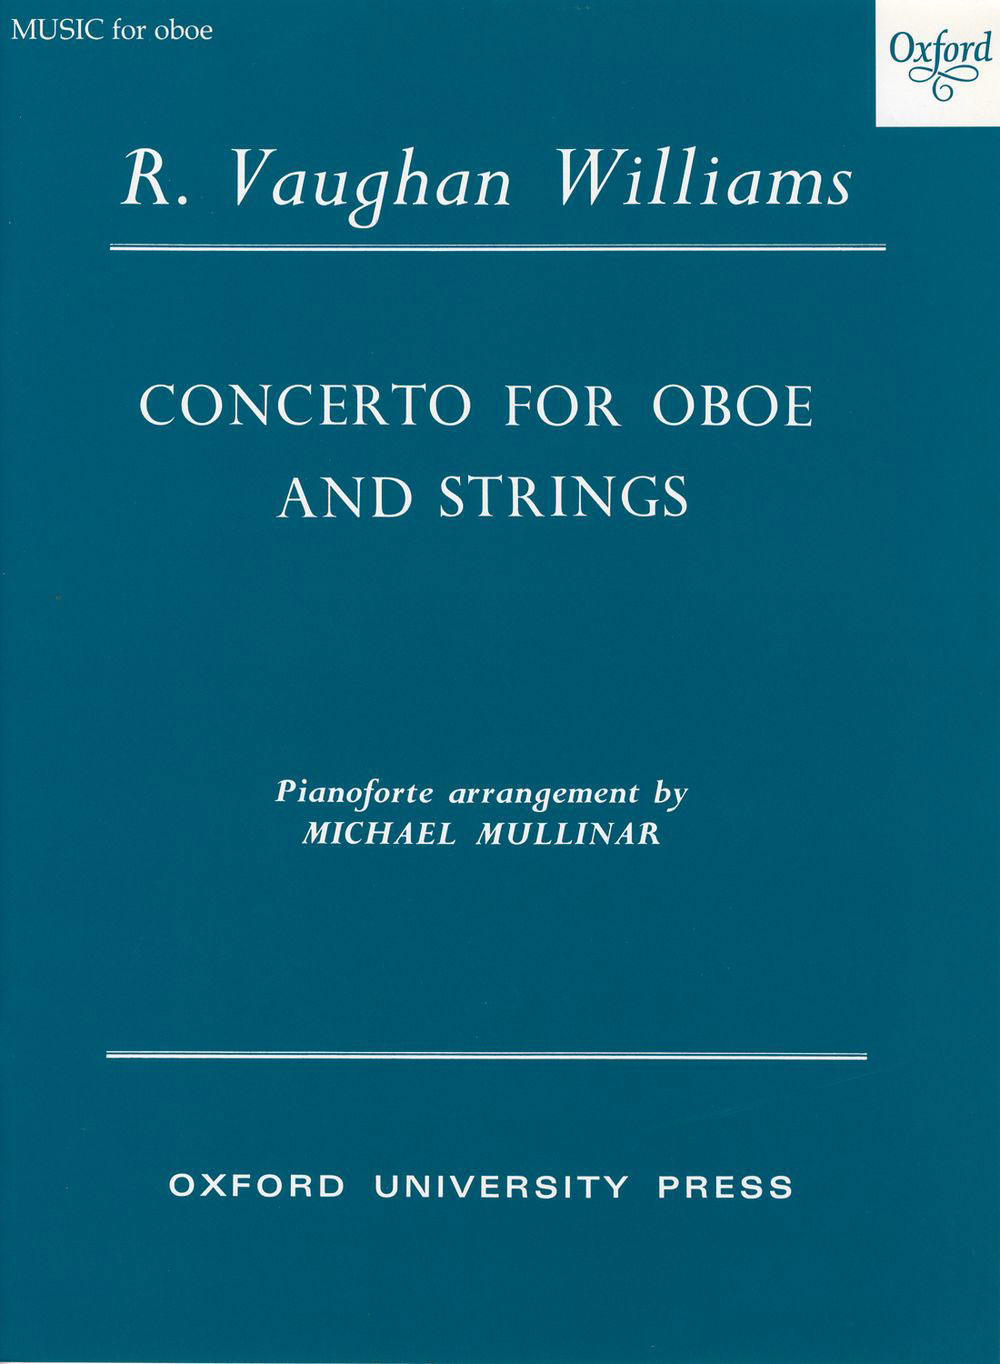 OXFORD UNIVERSITY PRESS VAUGHAN WILLIAMS R. - CONCERTO FOR OBOE AND STRINGS - REDUCTION PIANO 